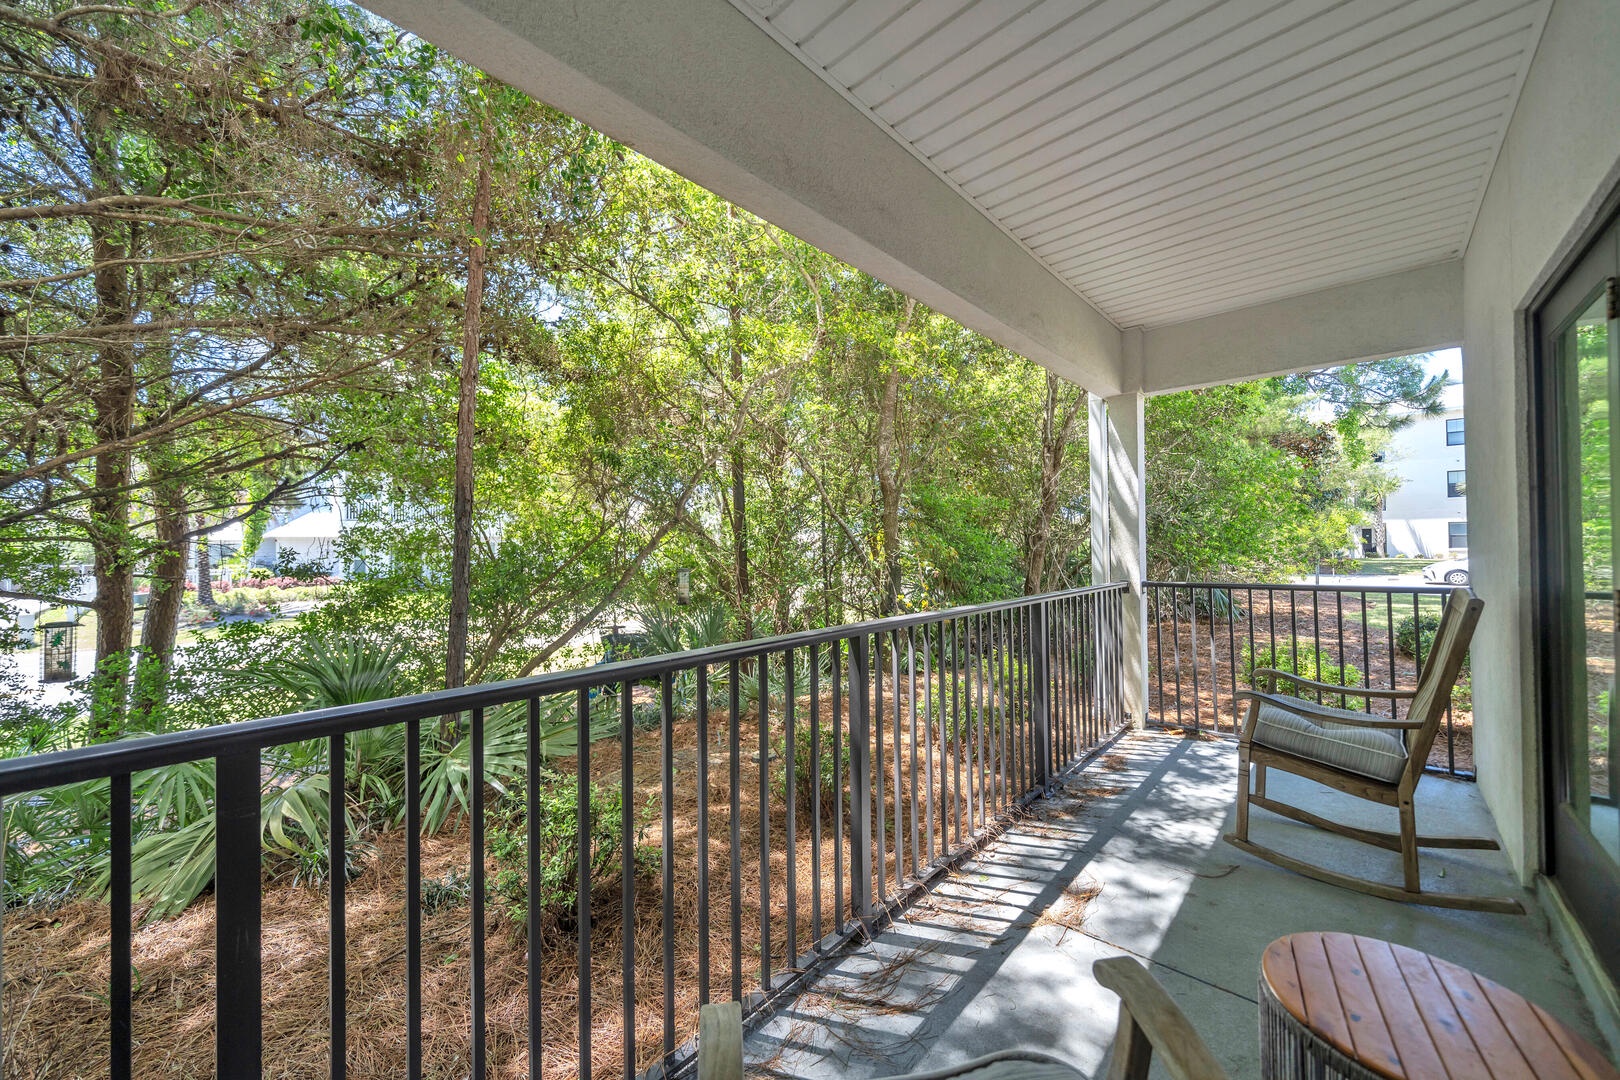 You'll love the secluded patio!